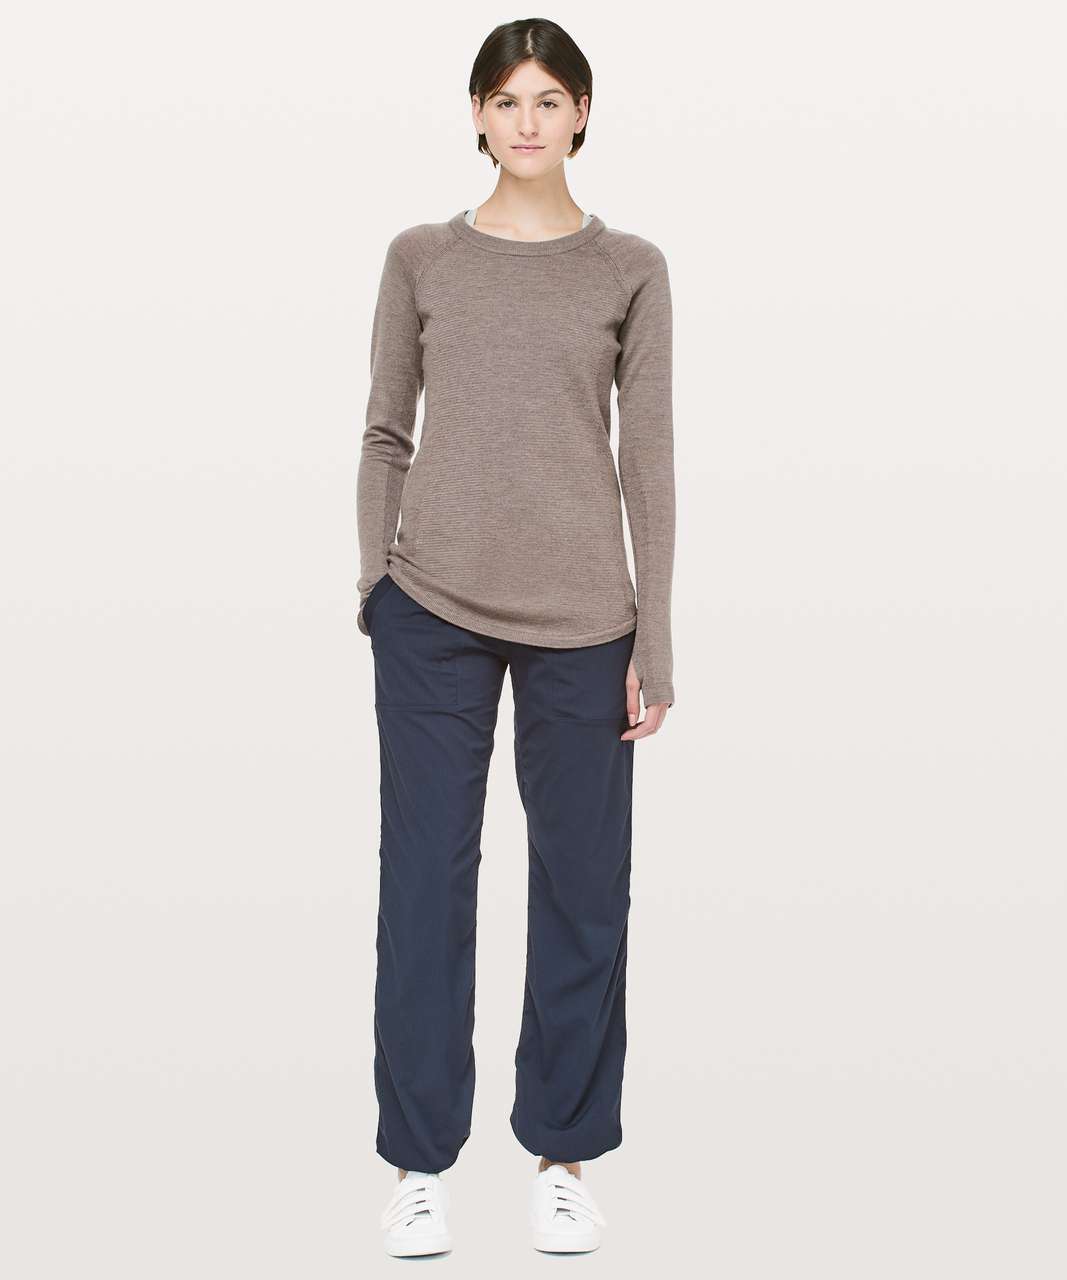 Lululemon Sit In Lotus Sweater - Heathered Cool Cocoa